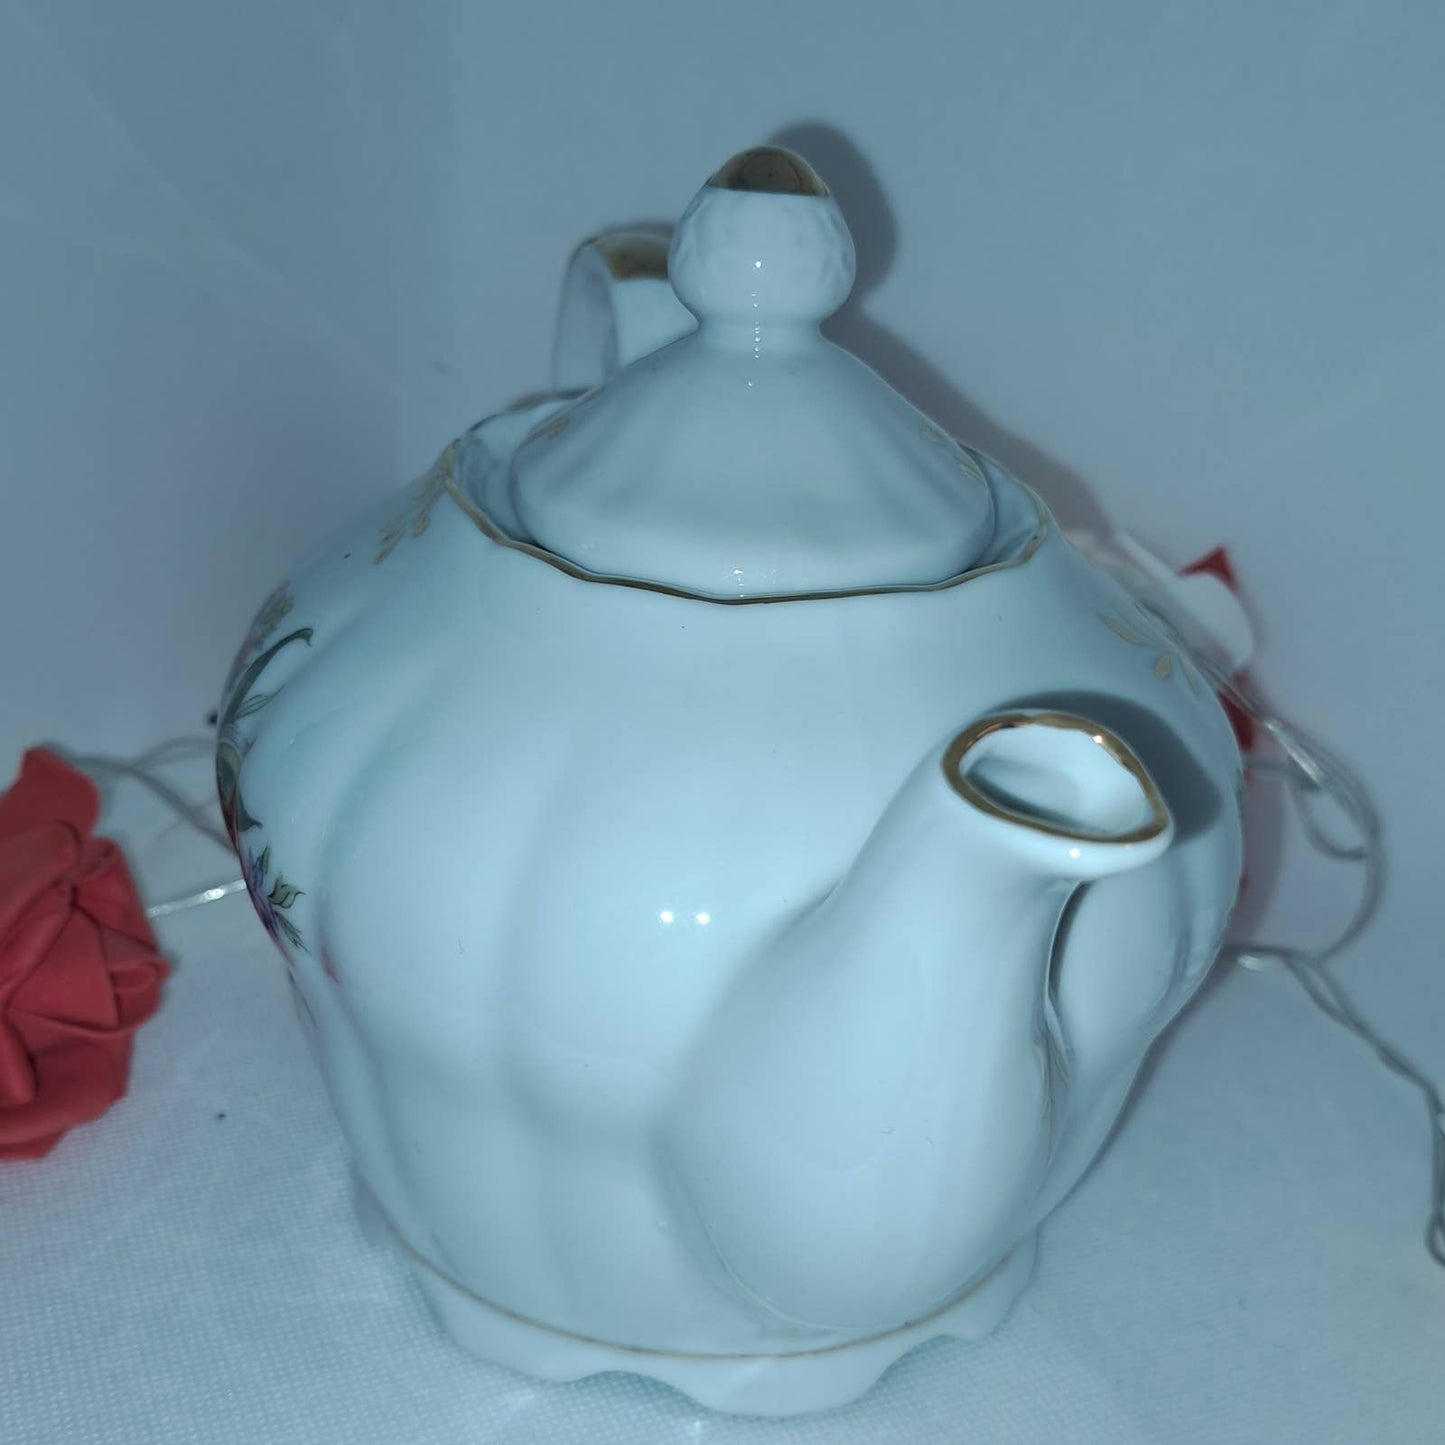 Elegant Vintage Musical Teapot with Bouquet and Gold Luster Lined Top